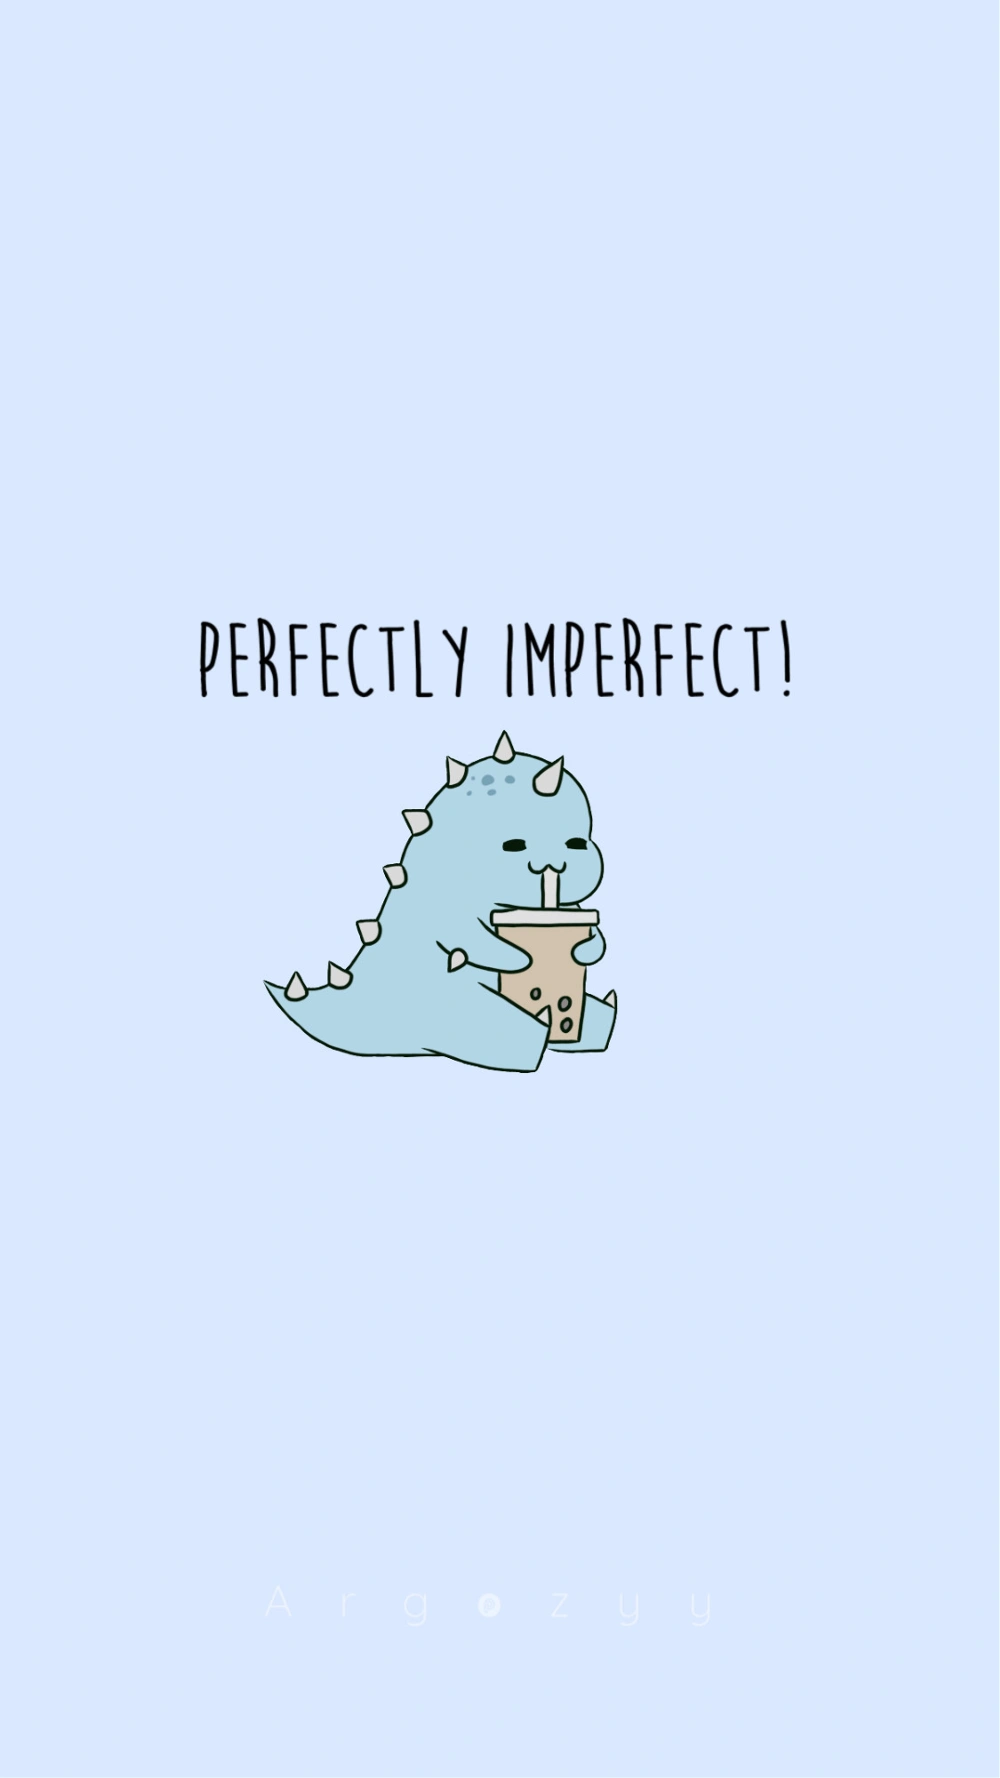 #dinosaur #cute #blue #perfectlyimperfect